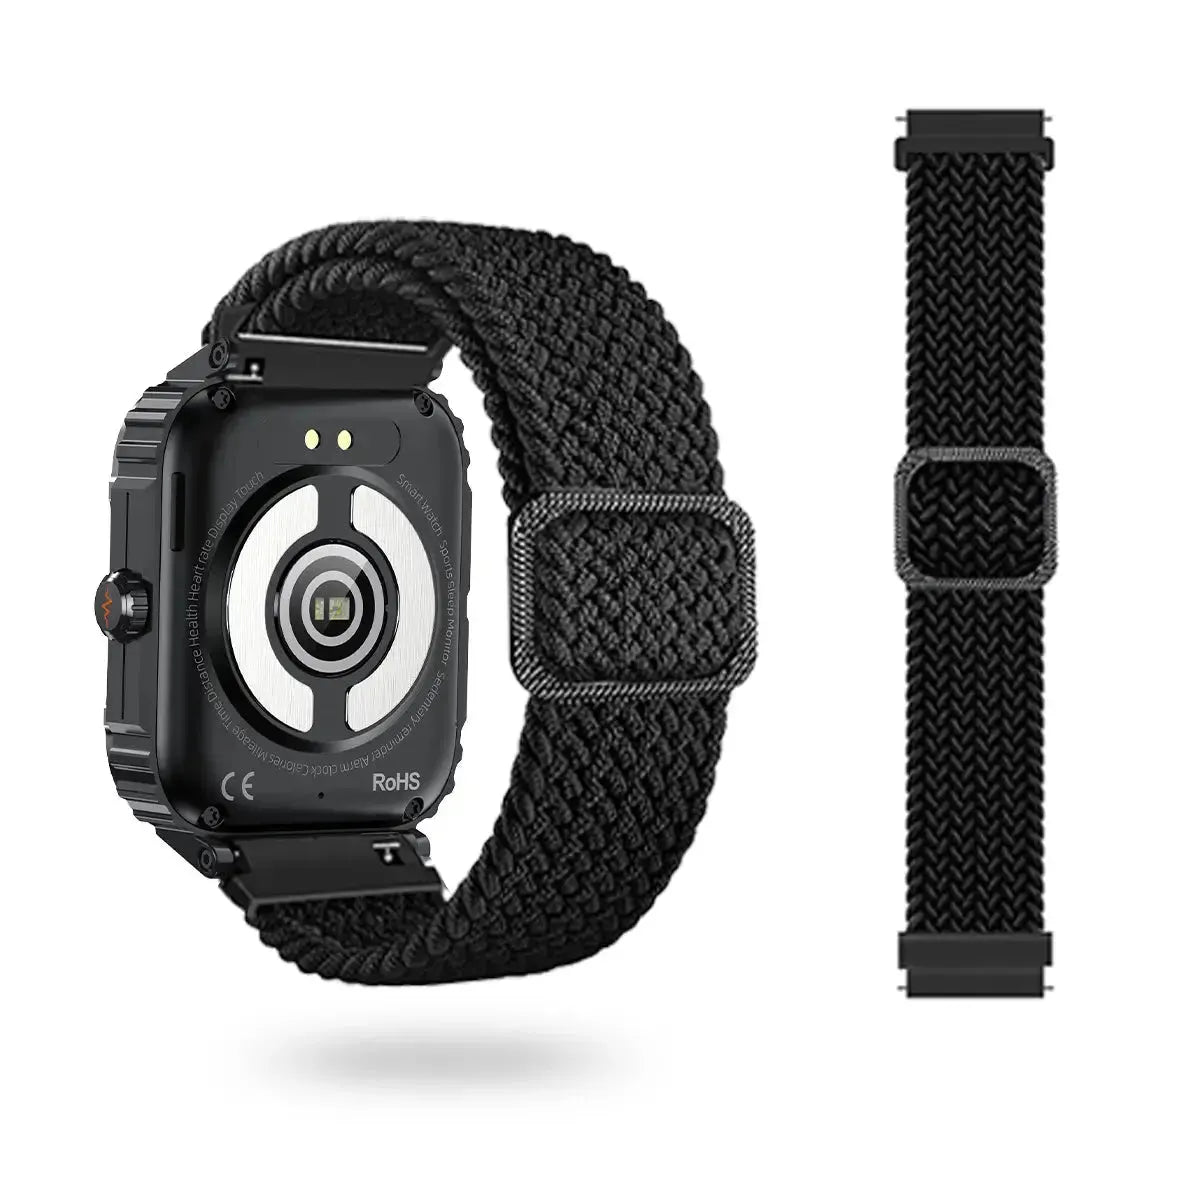 Tousains smartwatch S1 with black woven band